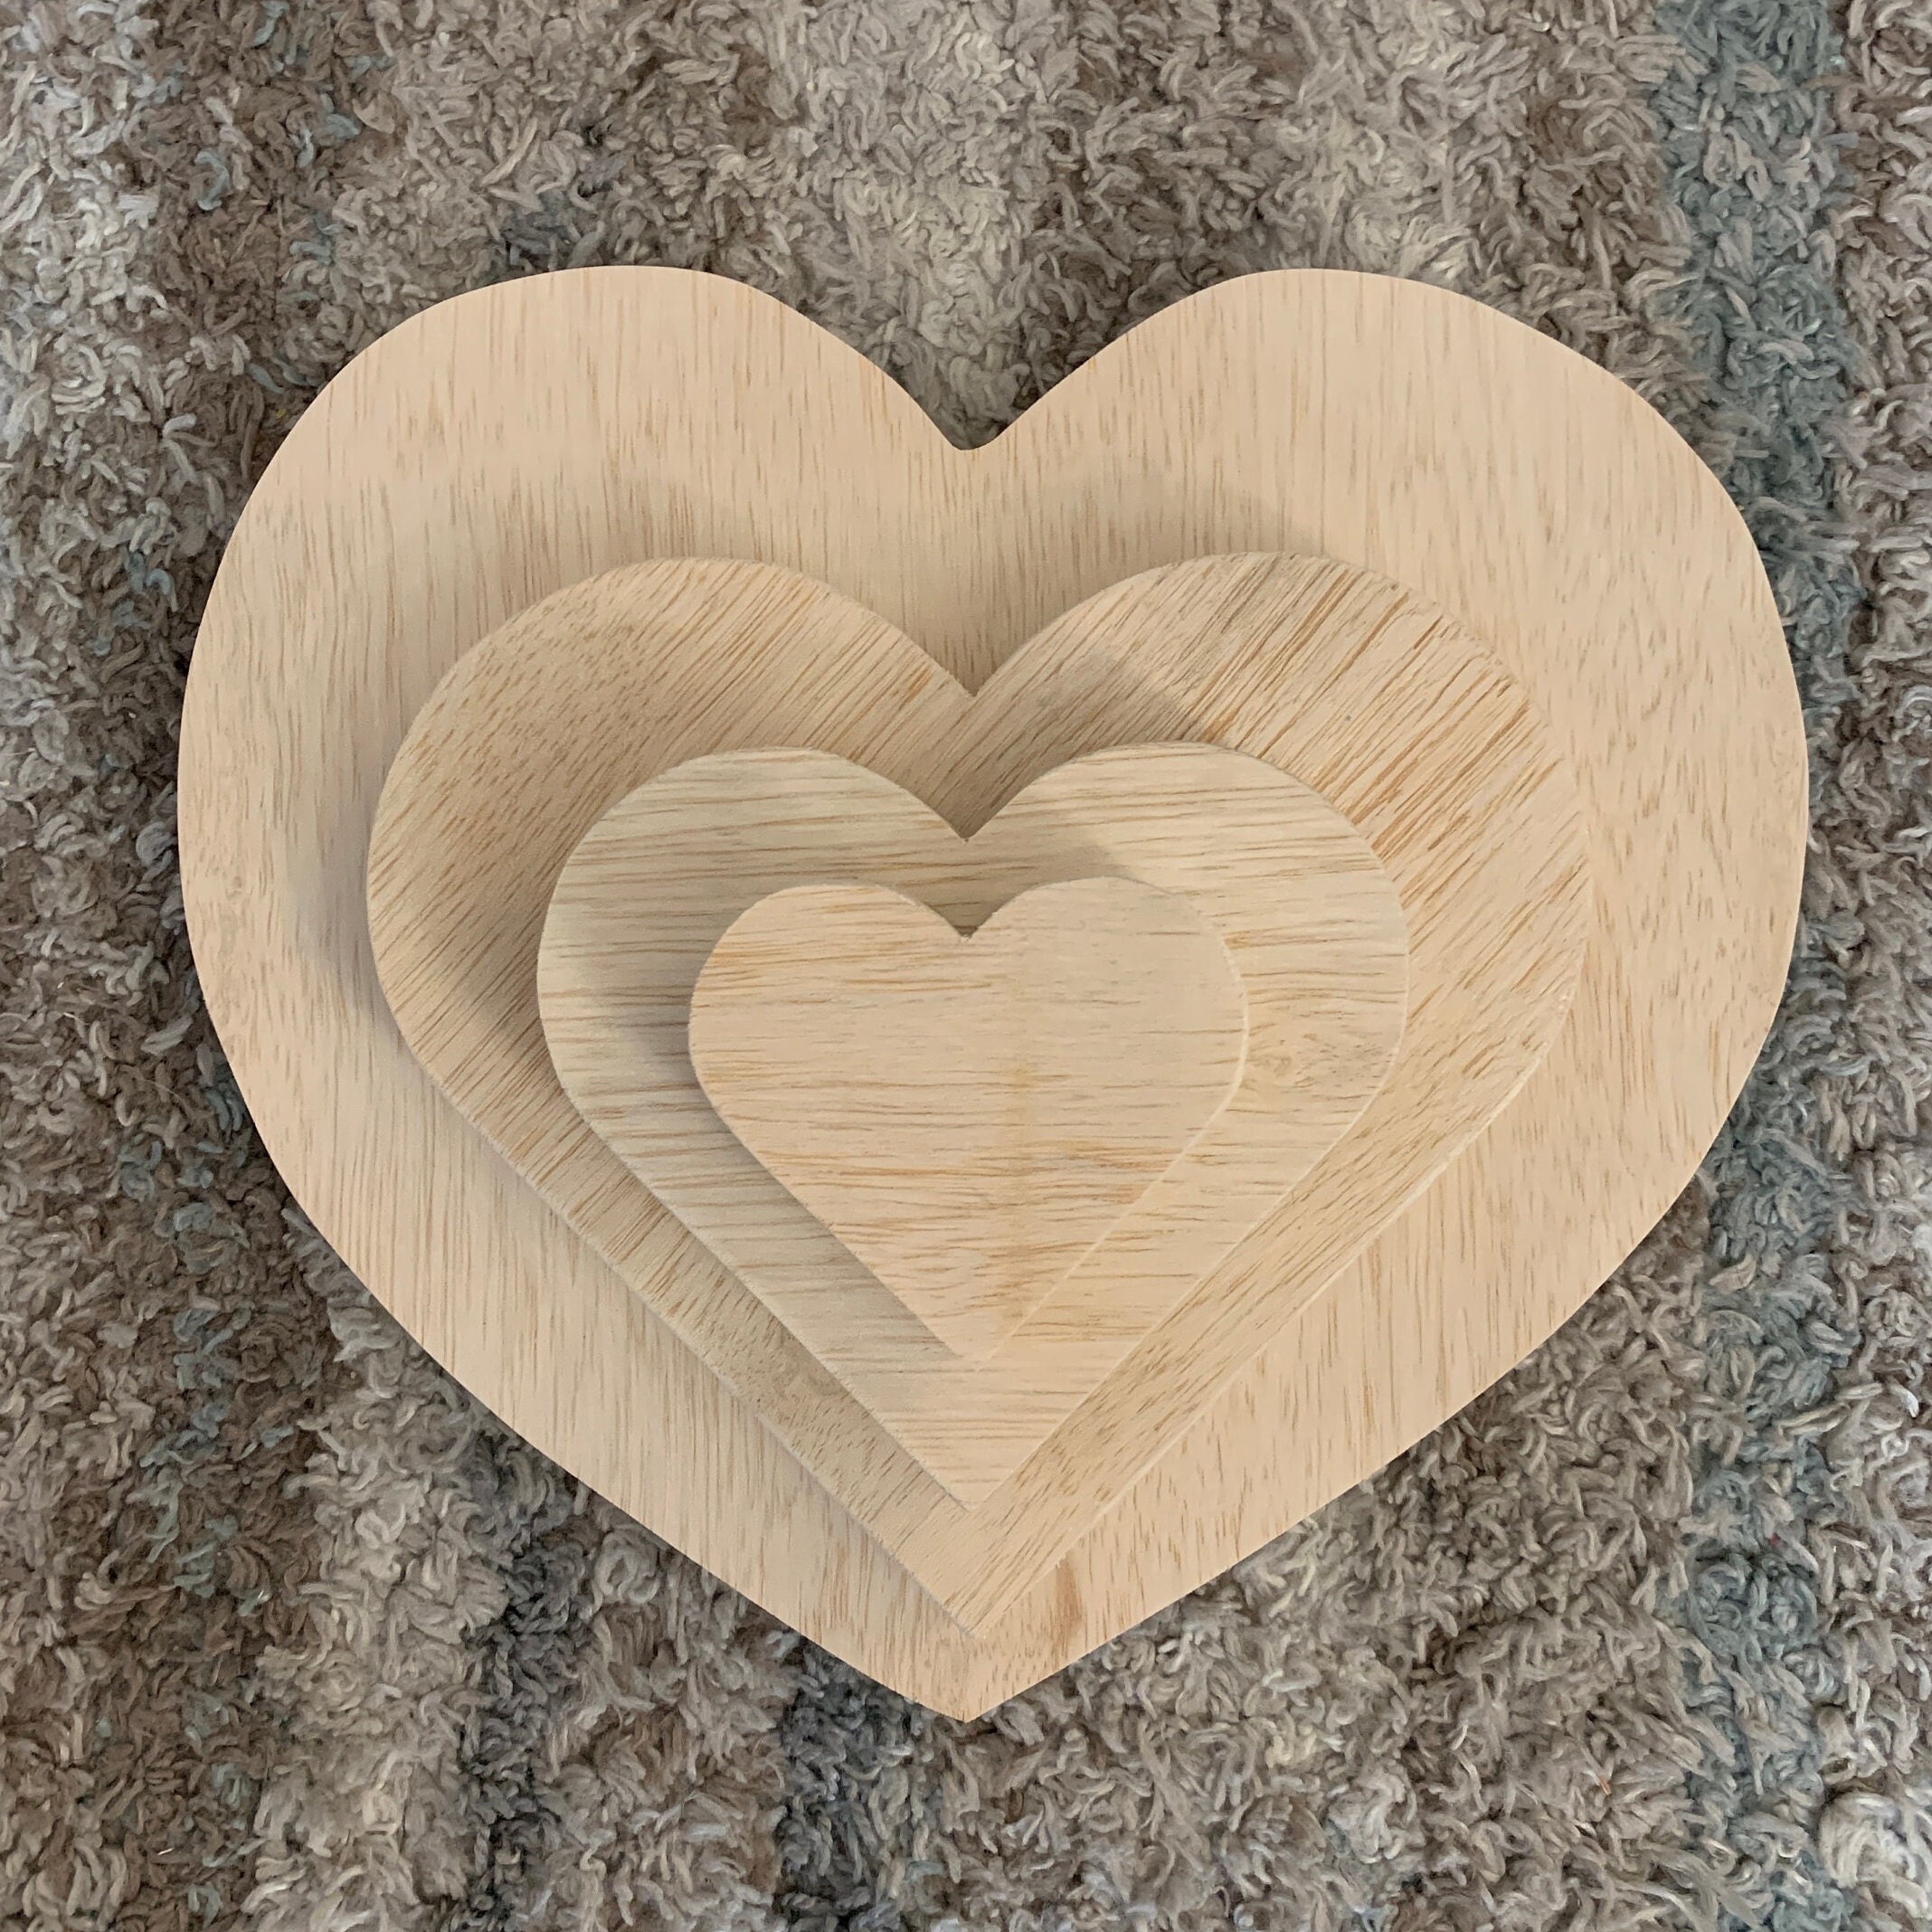 Dohia Natural Heart Wood Slices Unfinished Wooden Hearts for